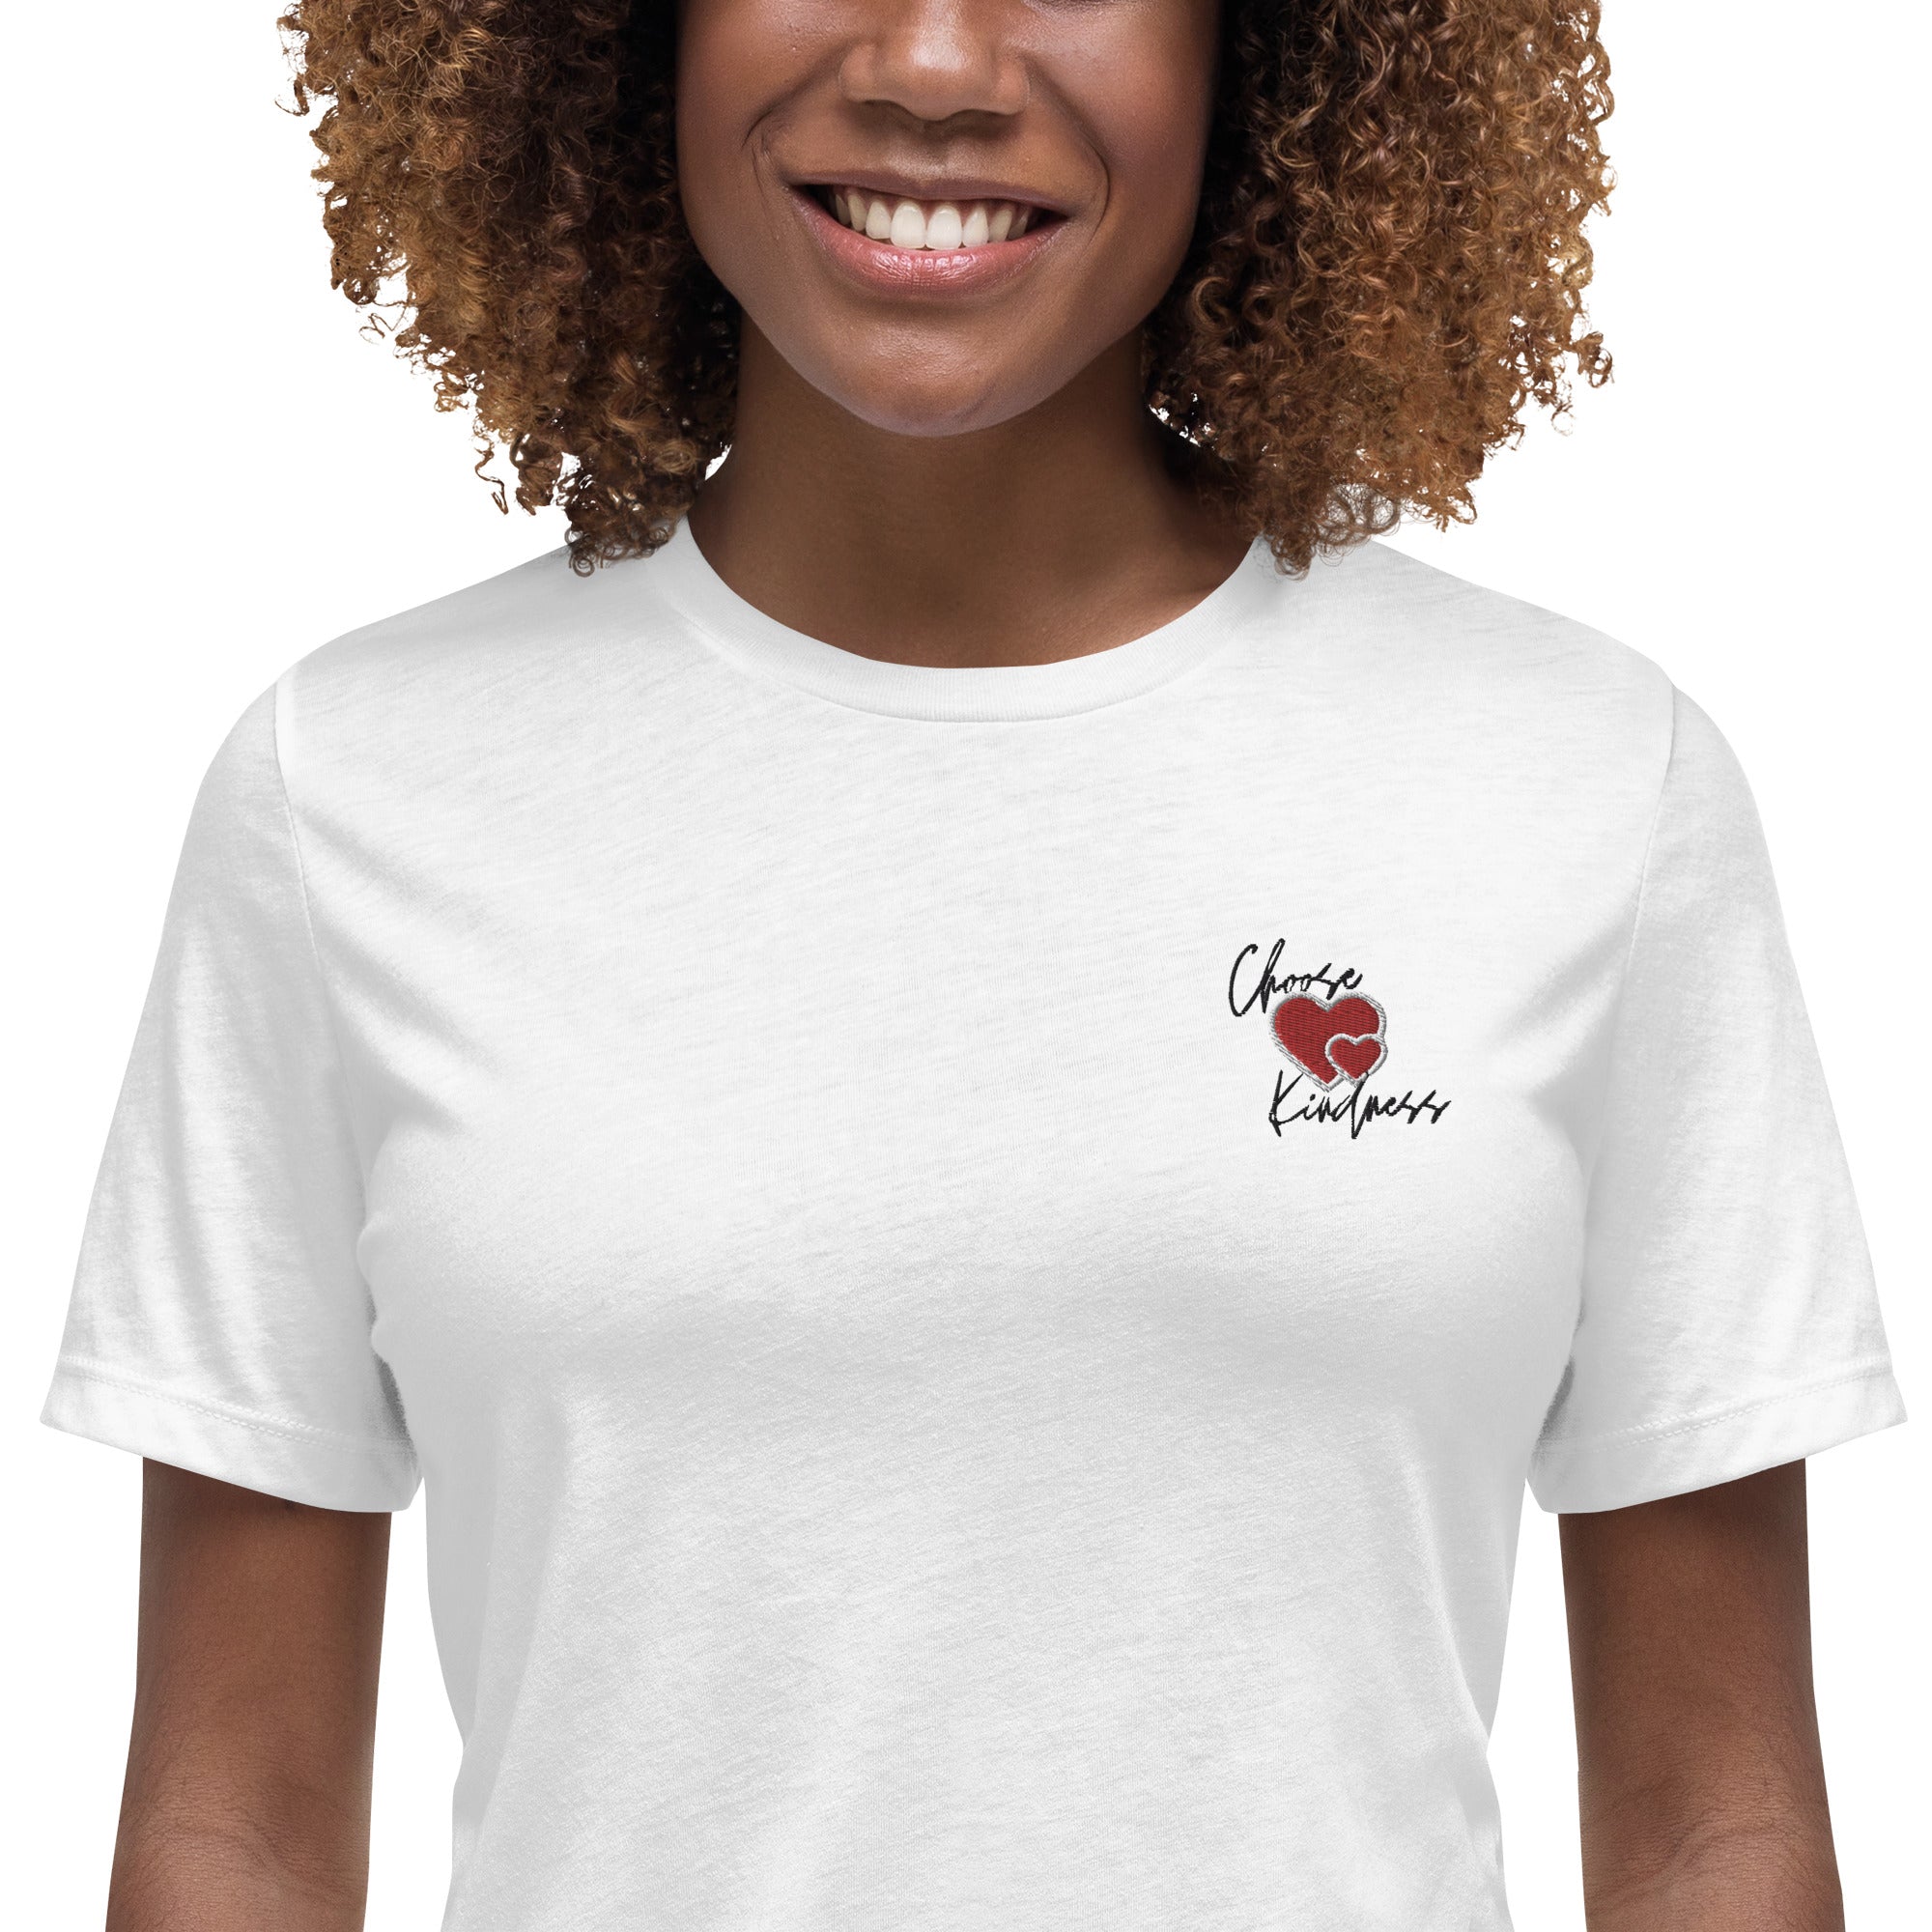 Choose Kindness Embroidered Women's Relaxed T-Shirt - The Kindness Cause